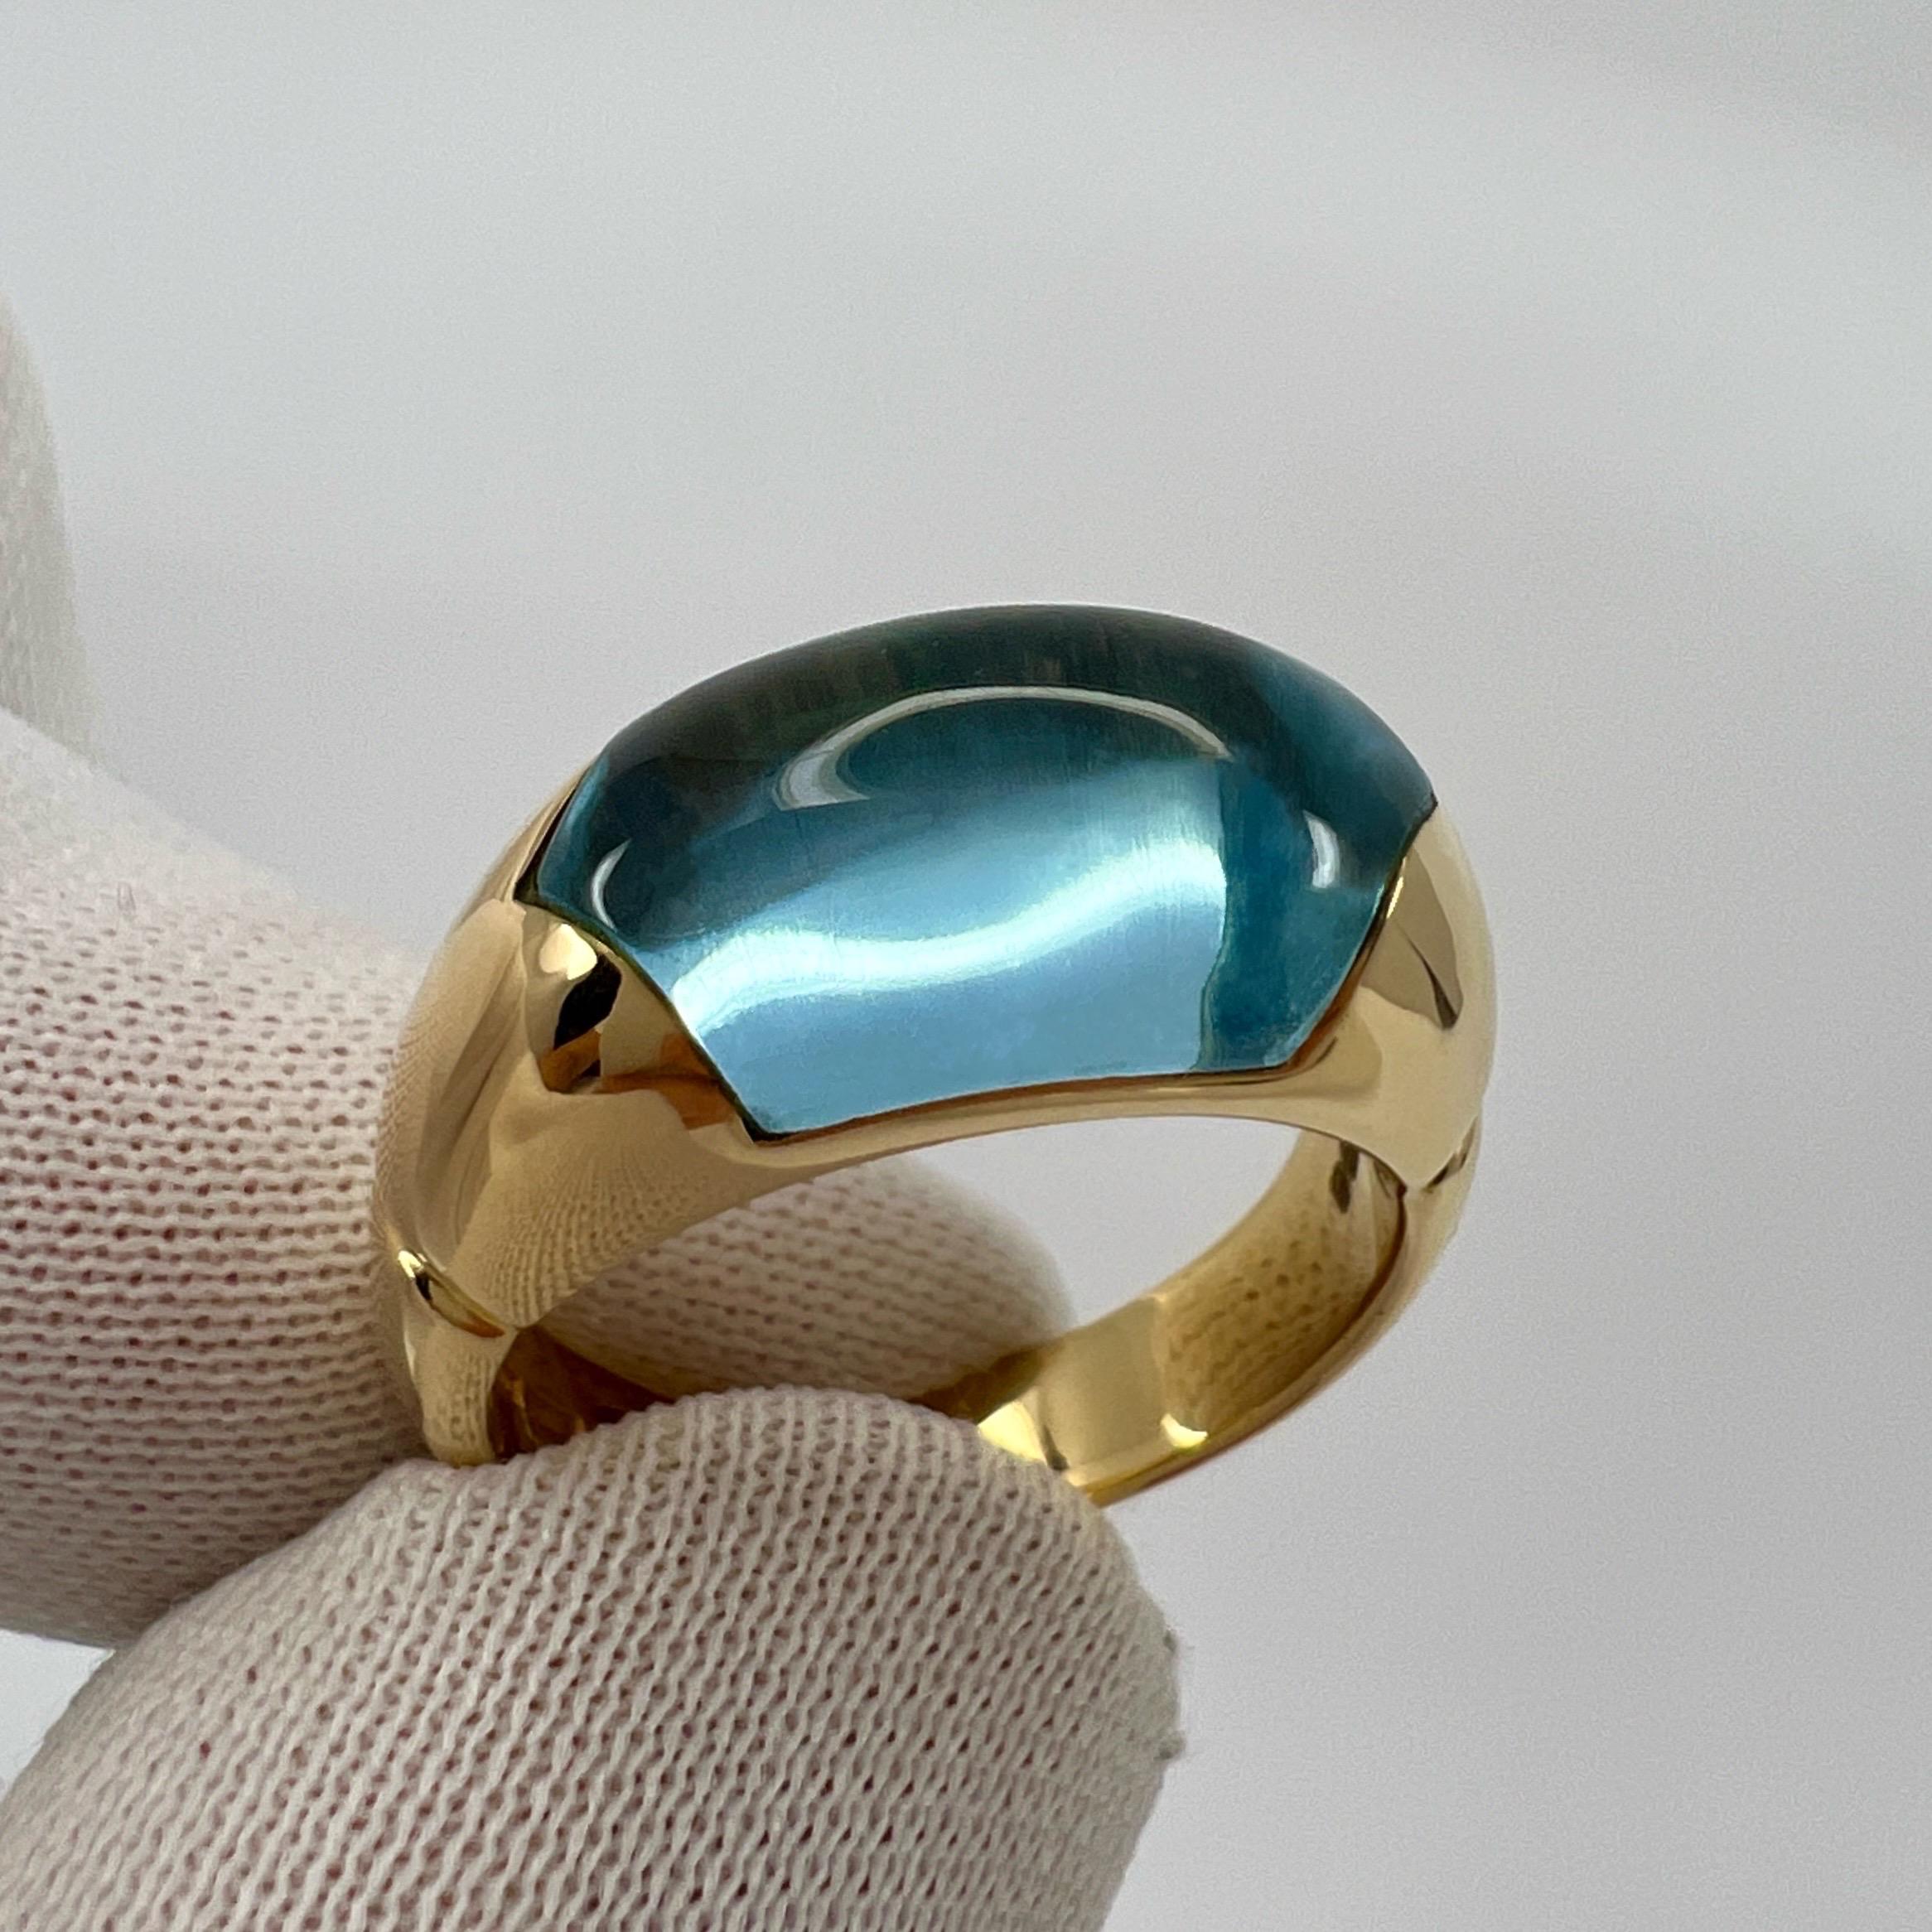 Vintage Bvlgari Certica 18k Yellow Gold Blue Topaz Dome Ring.

Beautiful domed blue topaz set in a fine 18k yellow gold tension set ring. Bold and stunning ring from the rare Bvlgari Certica collection.

In excellent condition, has been